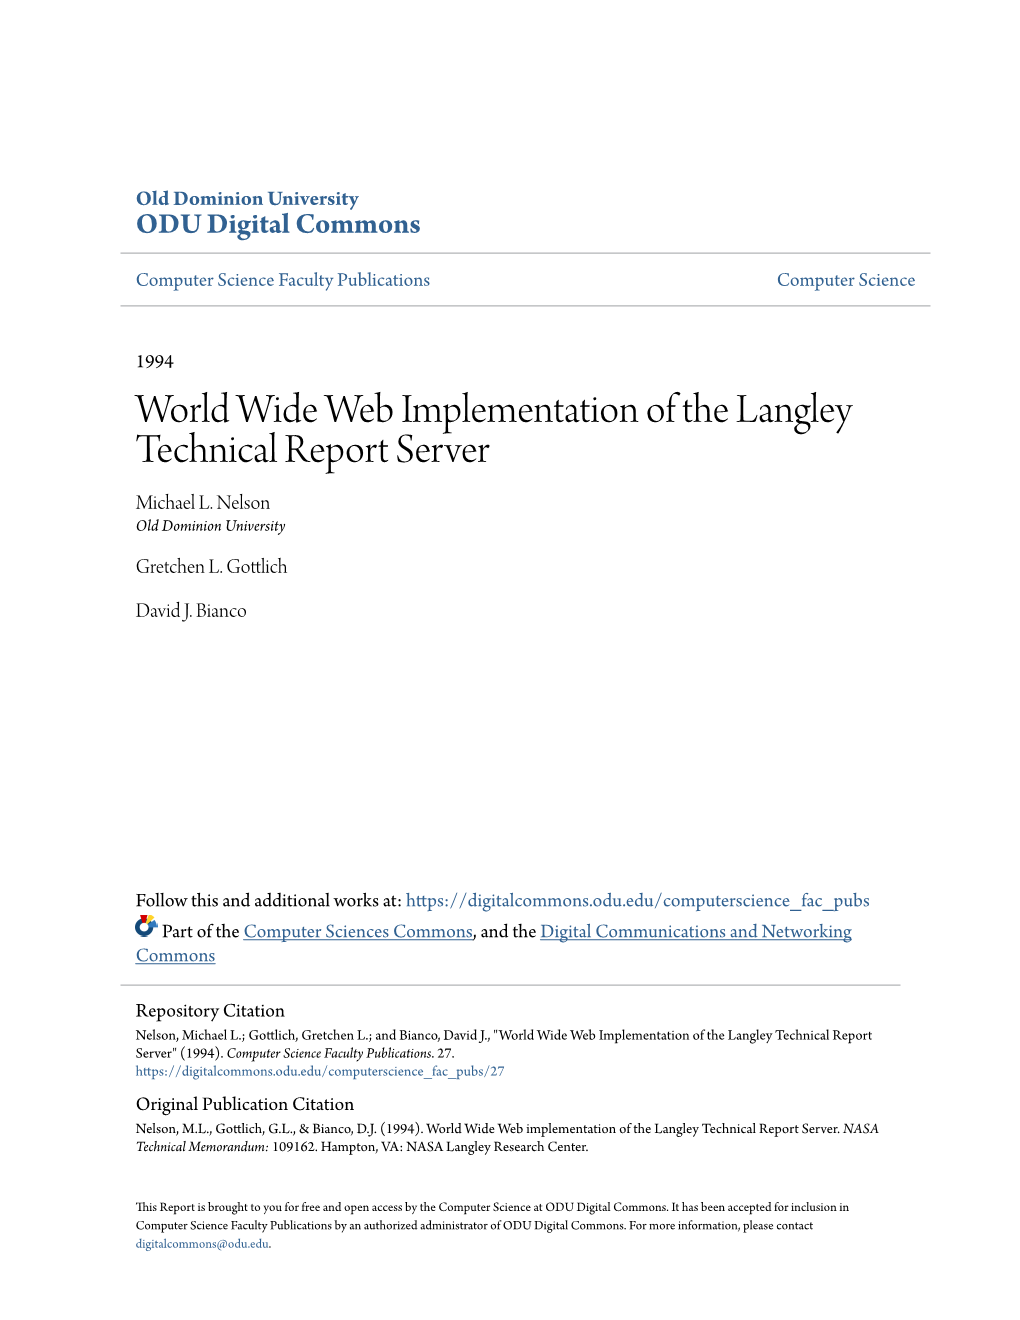 World Wide Web Implementation of the Langley Technical Report Server Michael L